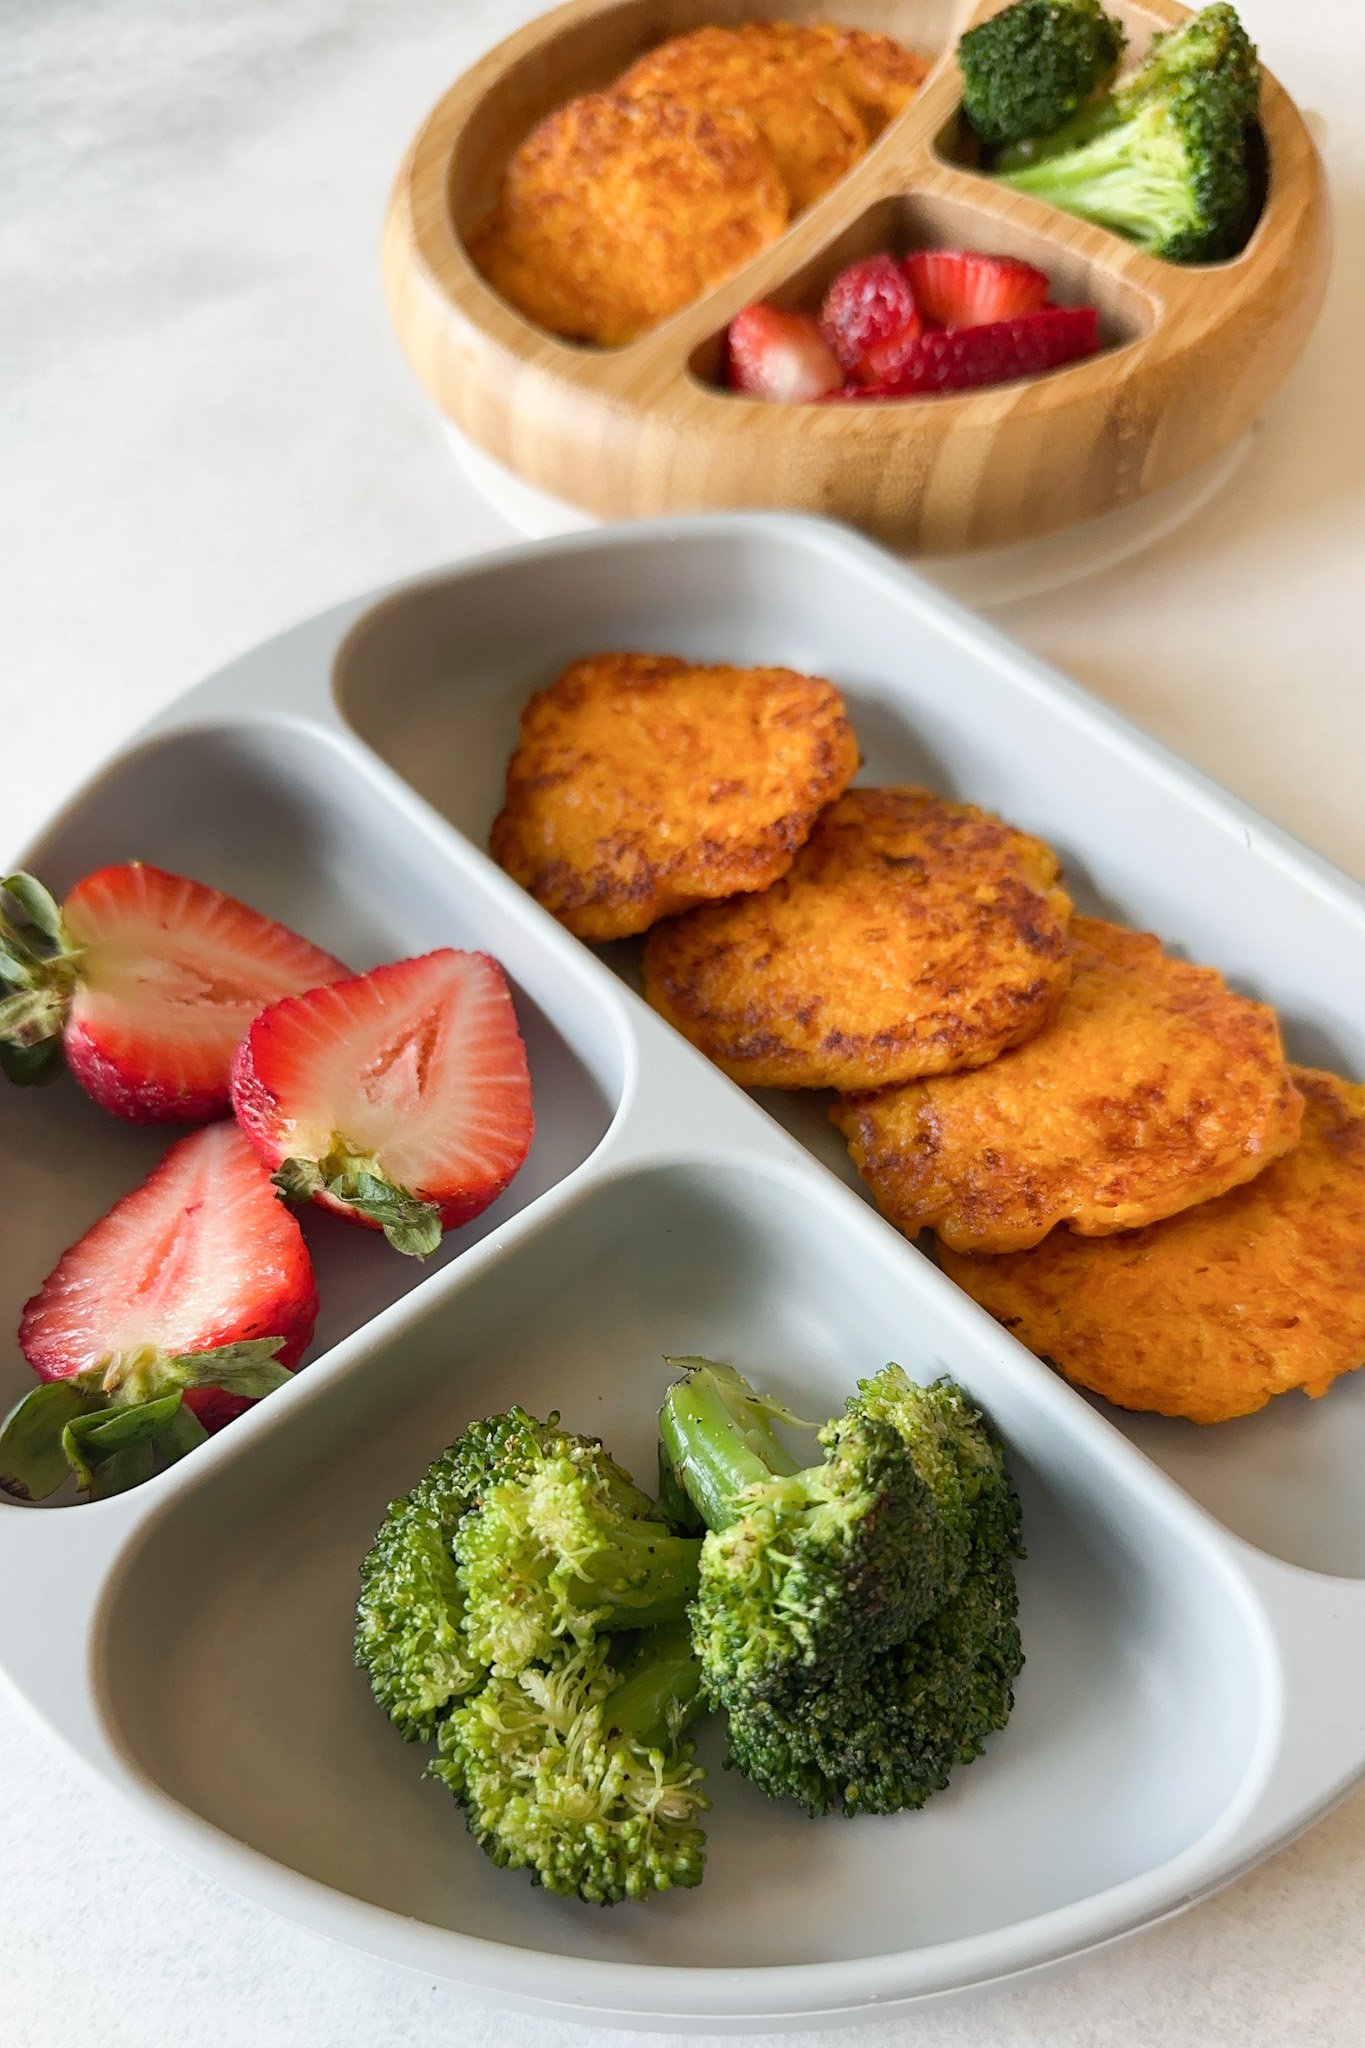 Cheesy carrot fritters served with strawberries and broccoli.